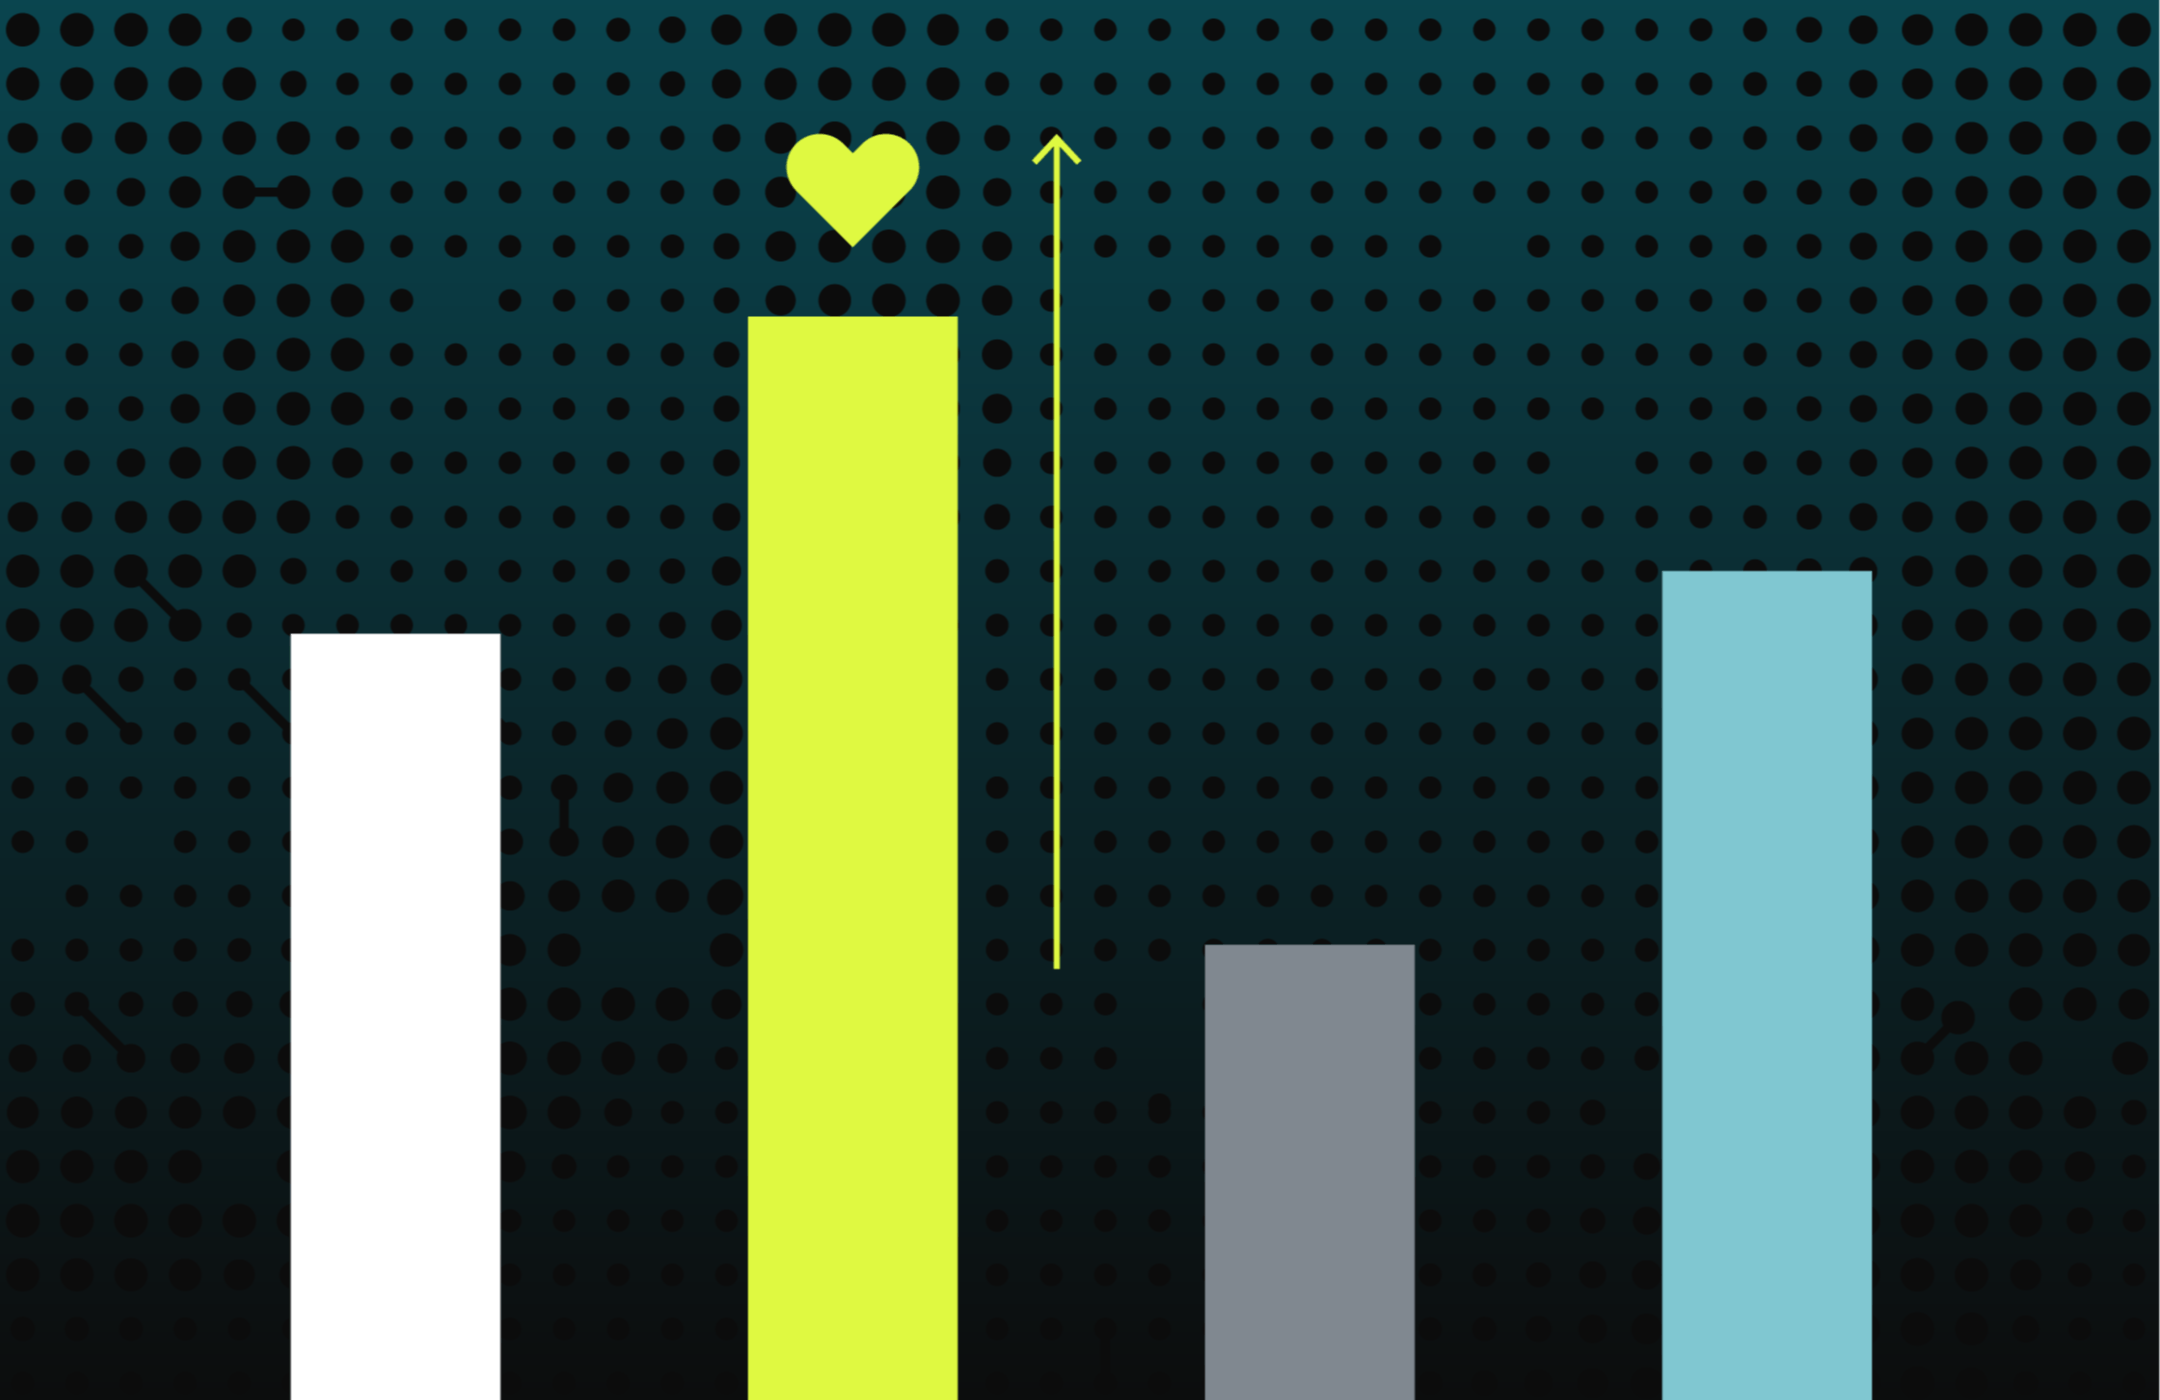 A bar graph showing an Amperity yellow bar with a heart icon on top.